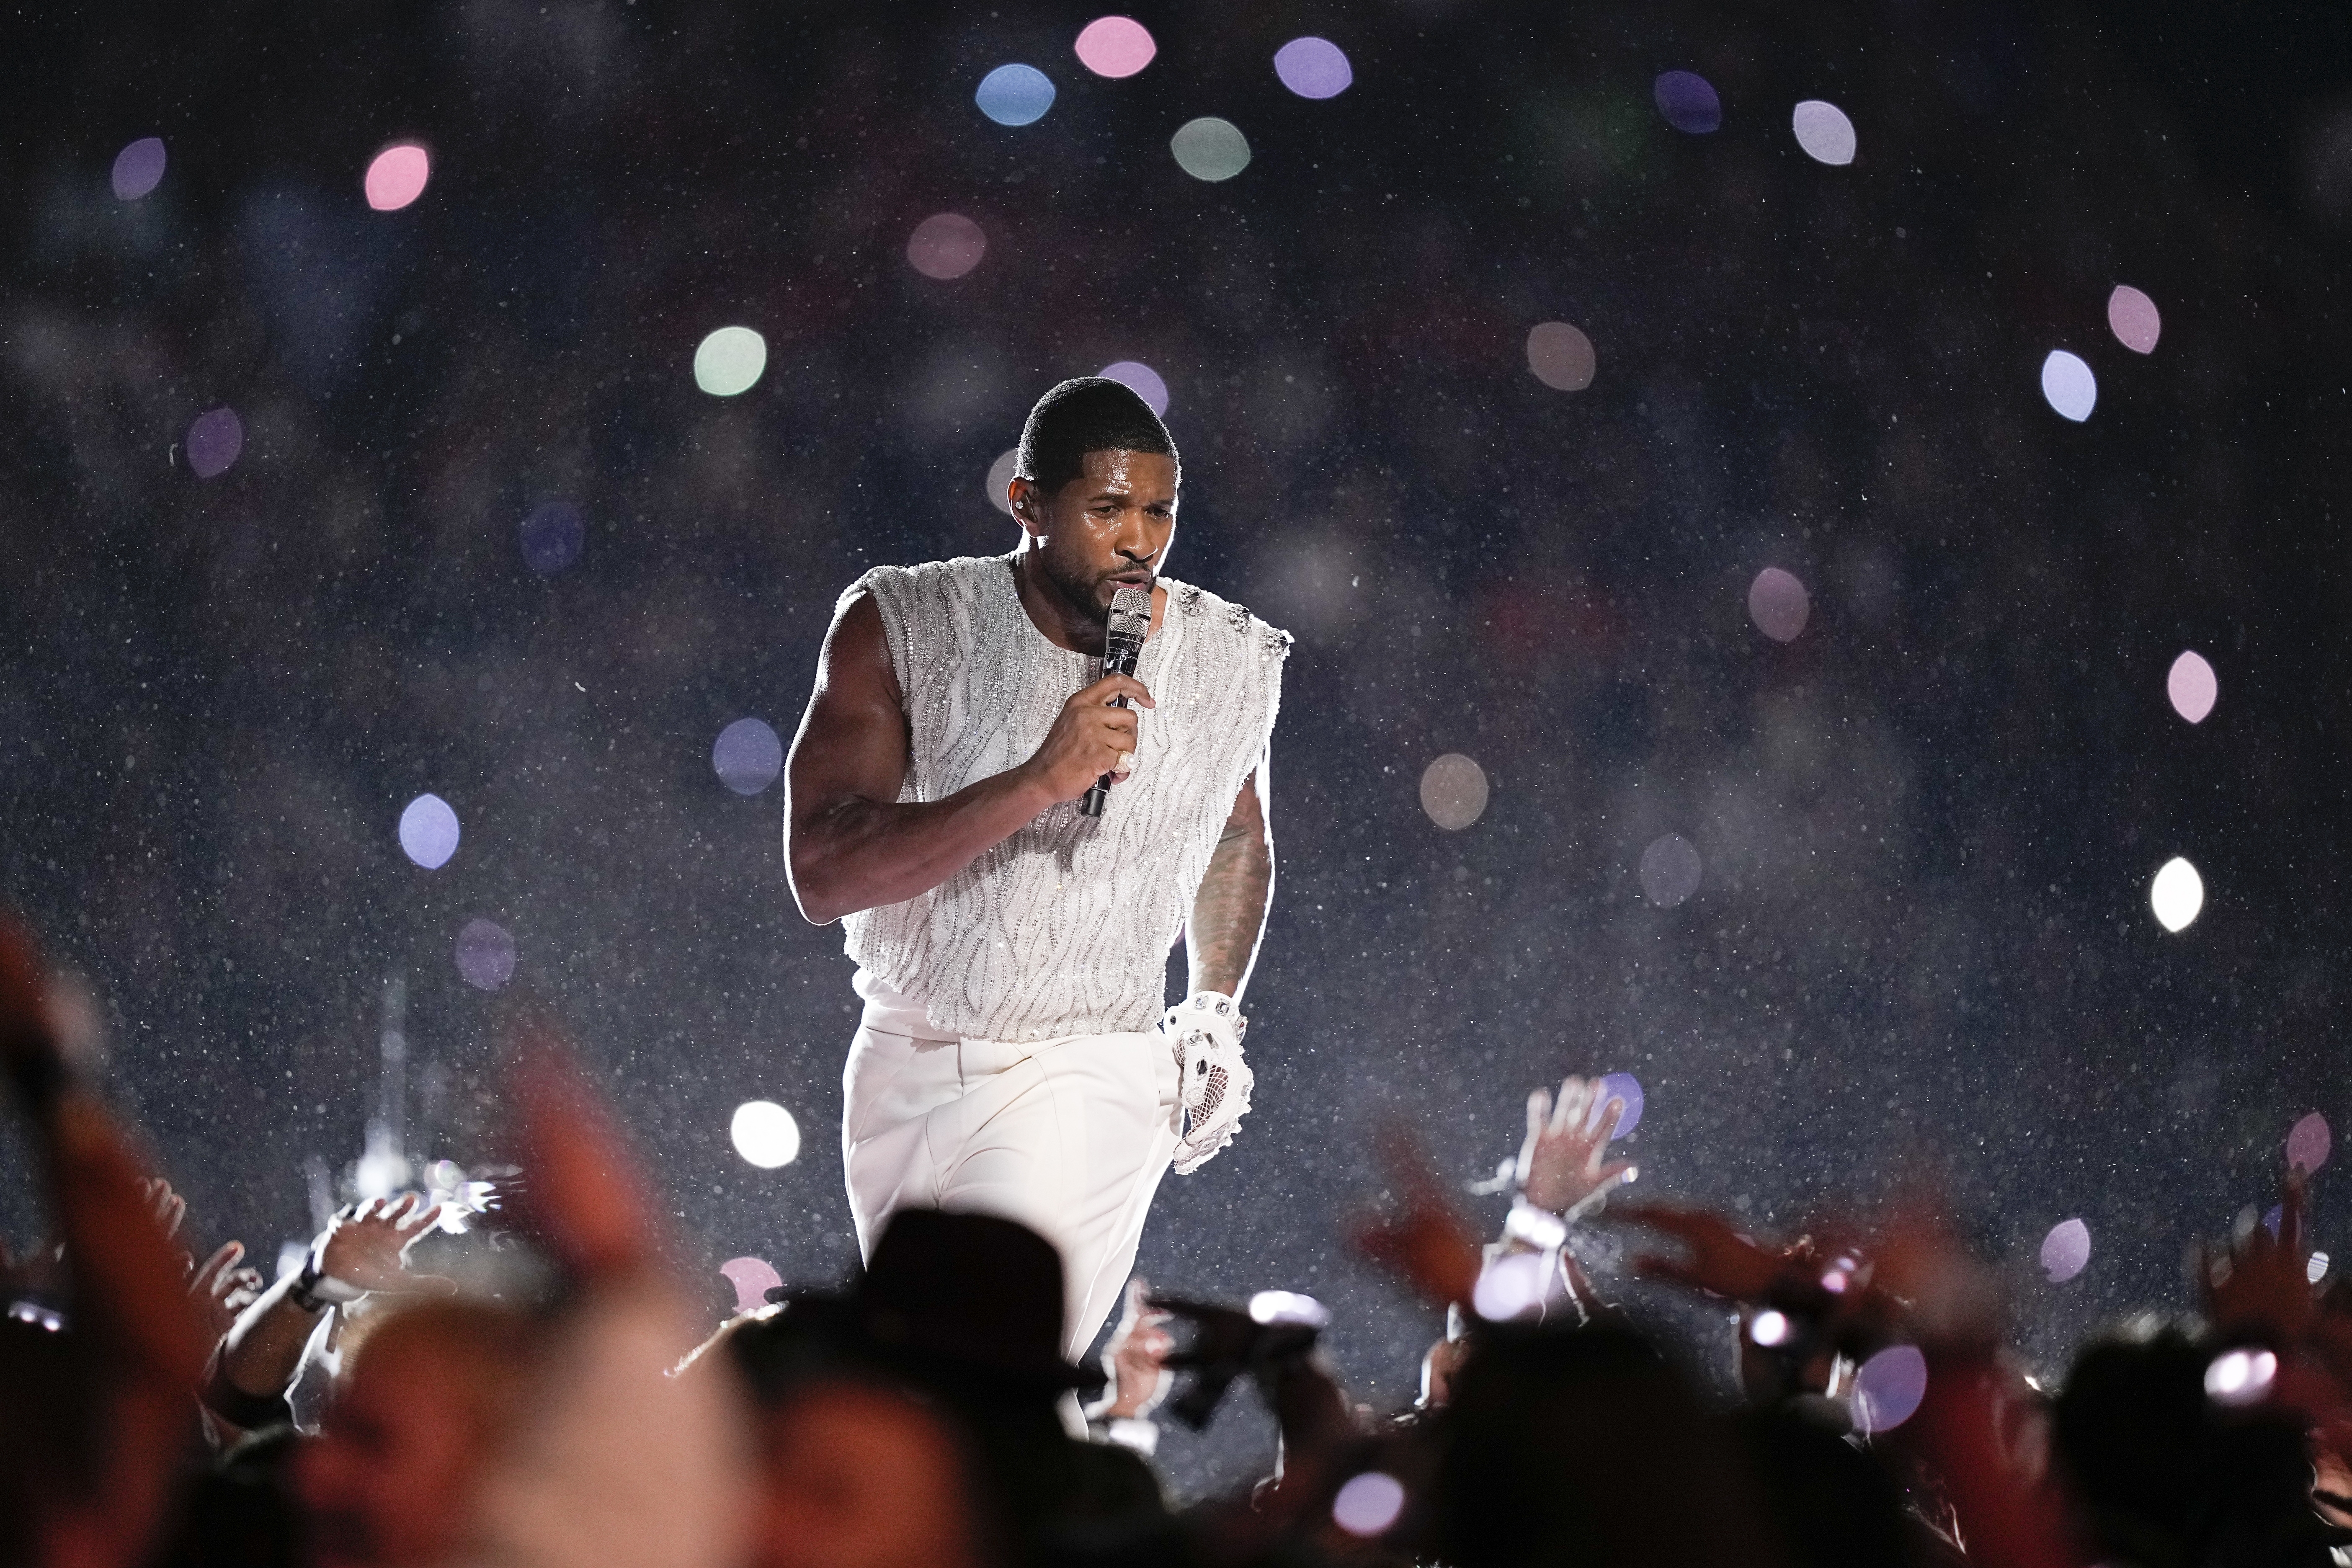 At the beginning of his performance, fans complained that they couldn't hear Usher